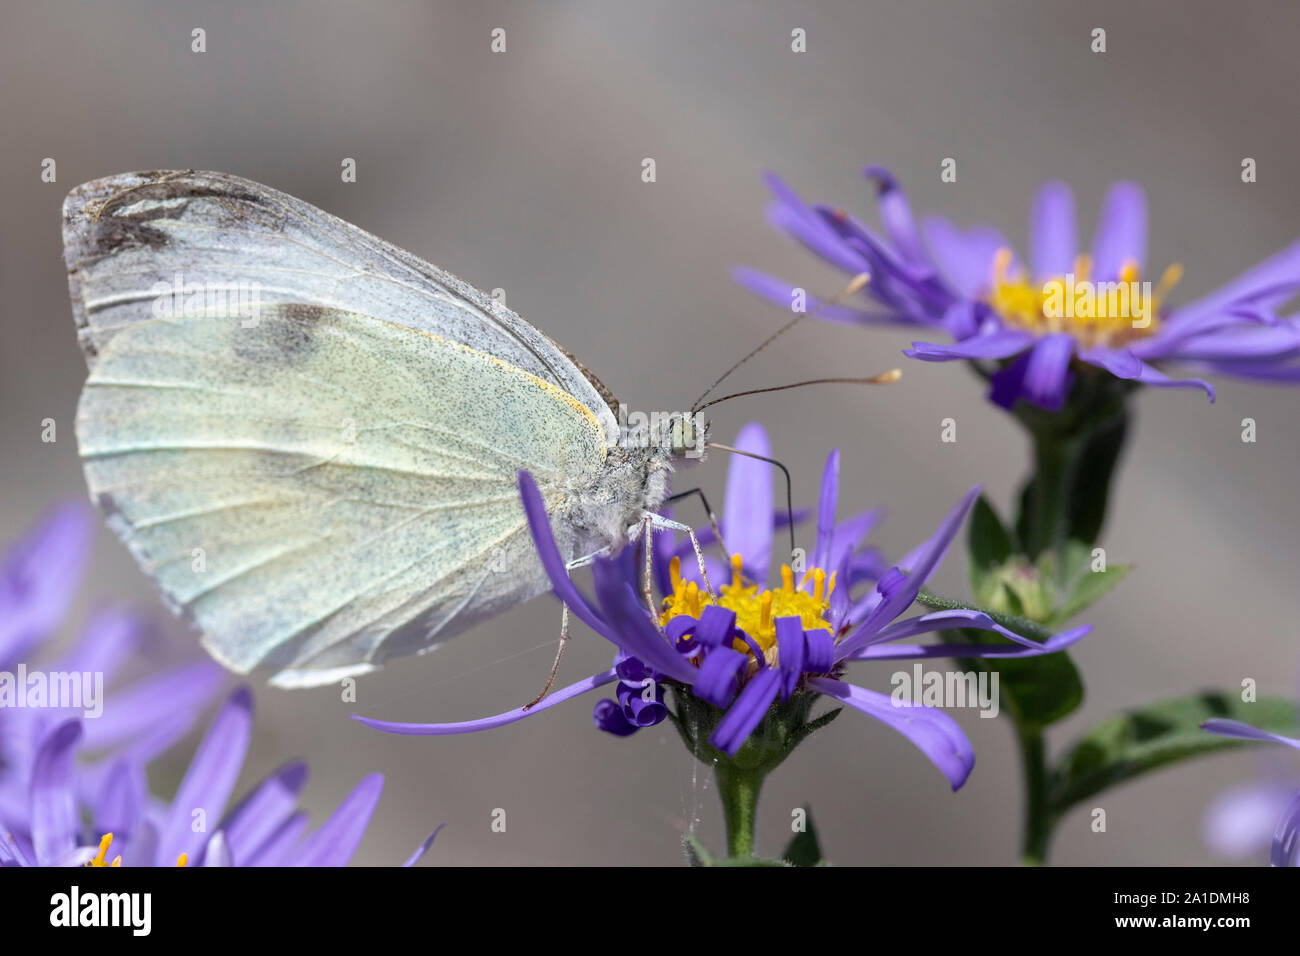 Close-up image of a Small White Butterfly (Pieris rapae) on Aster x frikartii 'Monch' Stock Photo